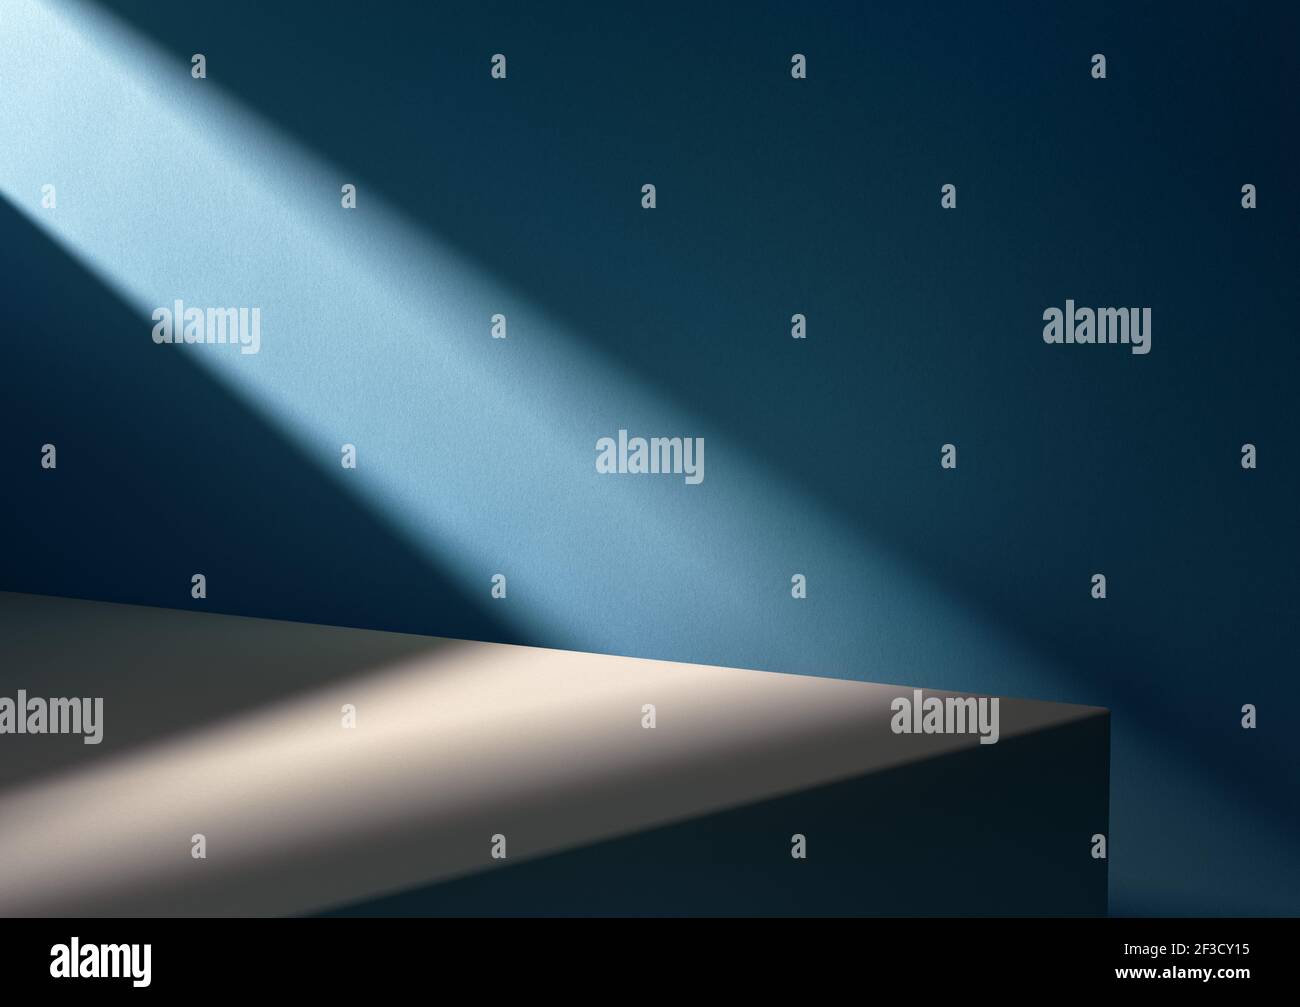 3D illustration of horizontally divided blue and beige product background lit by diagonal light stripe. Stock Photo